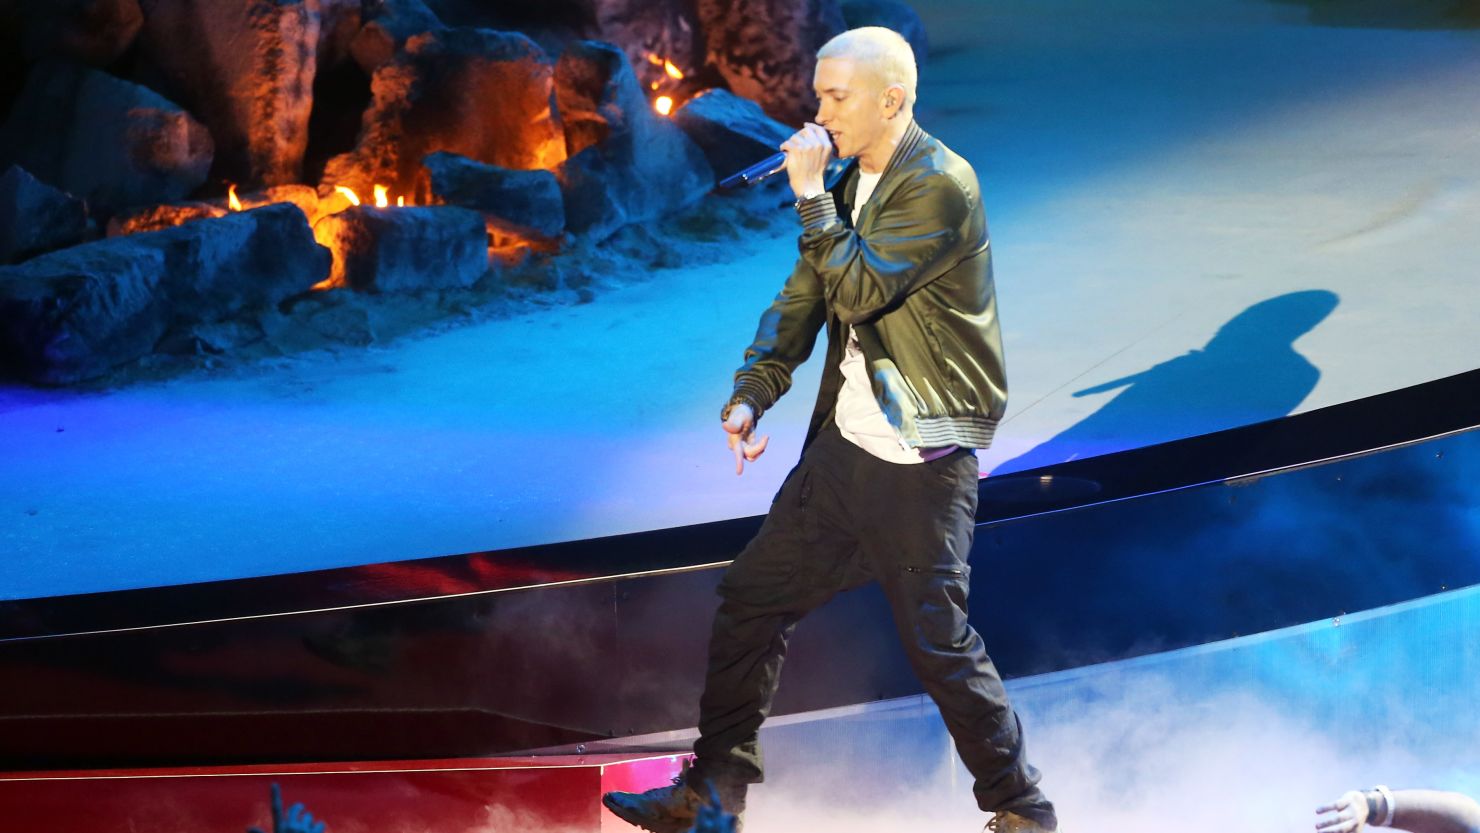 Rapper Eminem performs onstage at the 2014 MTV Movie Awards at Nokia Theatre L.A. Live on April 13, 2014 in Los Angeles, California.